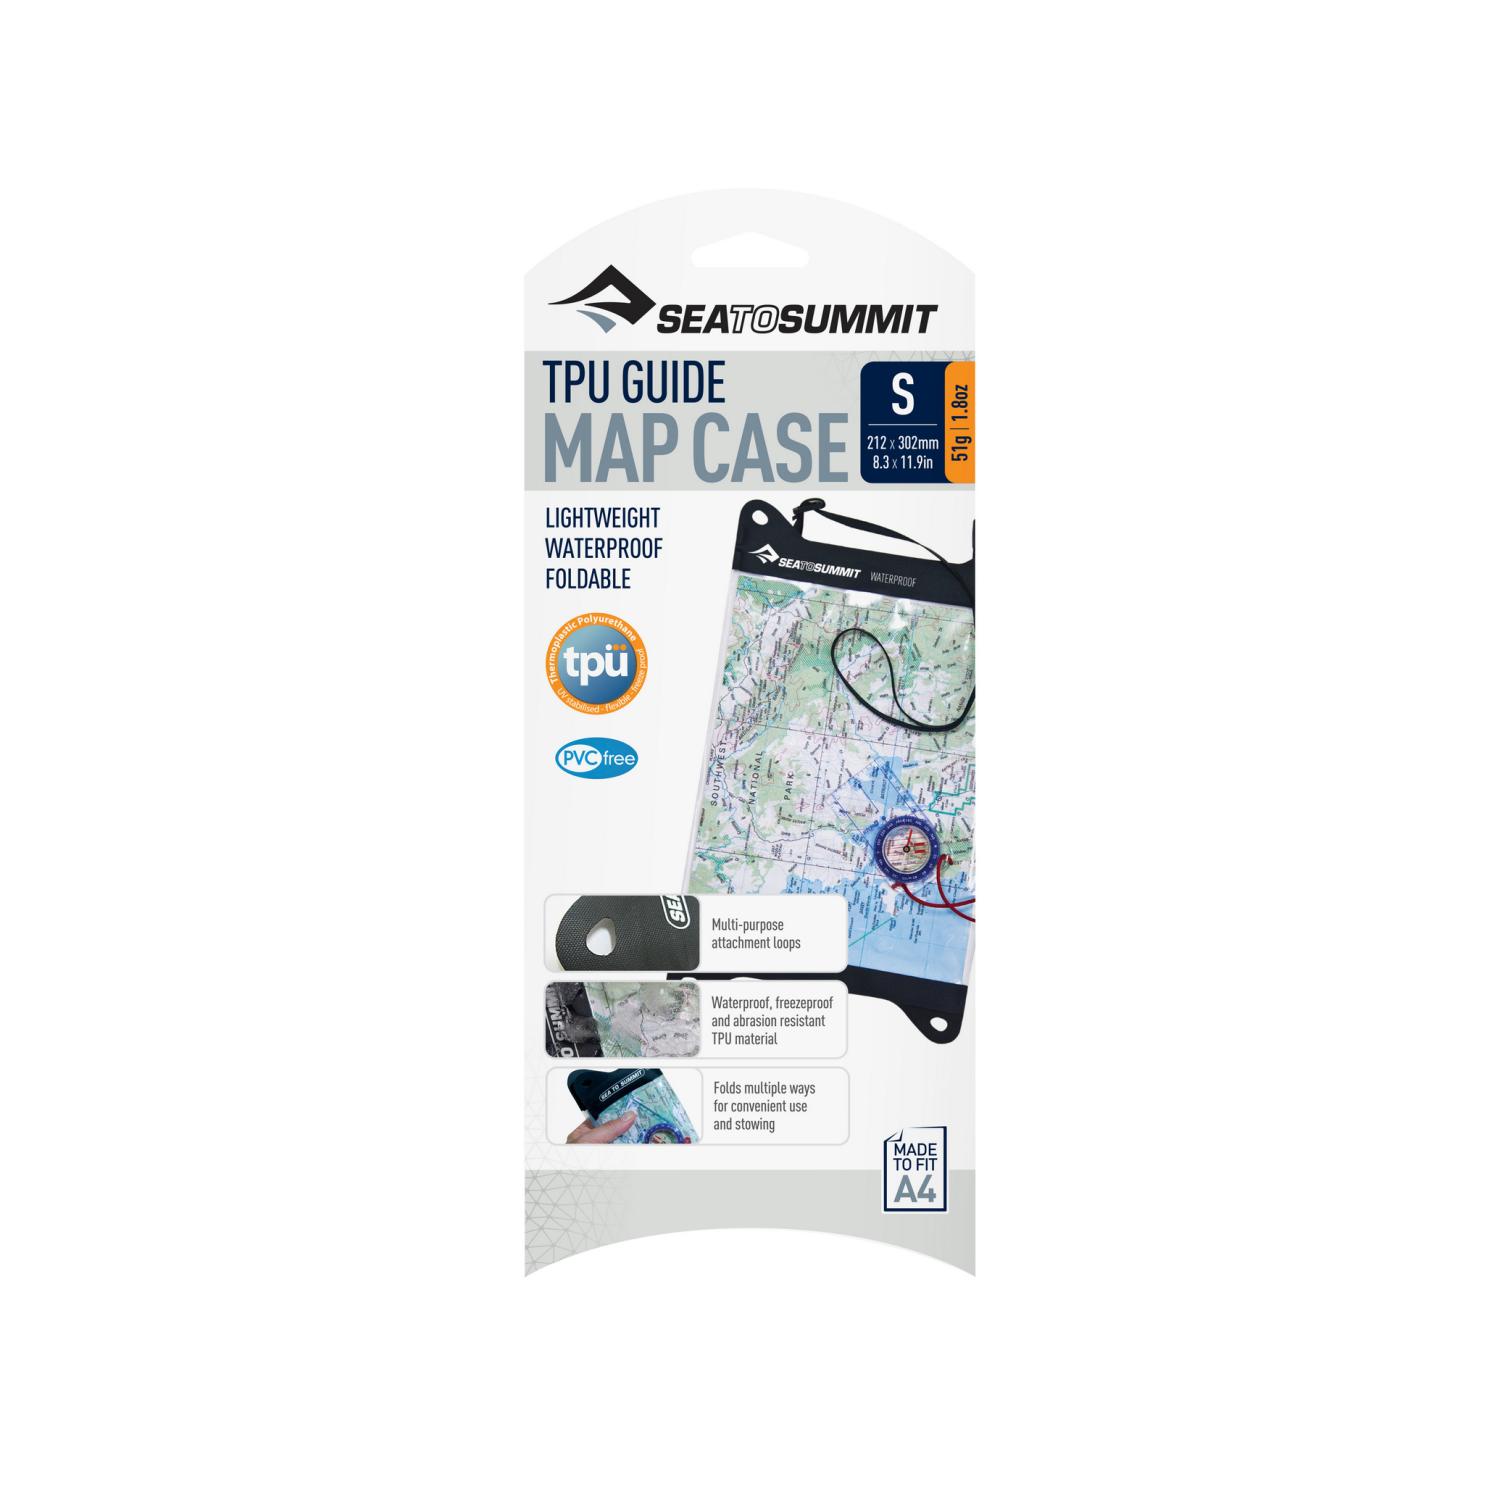 SEA TO SUMMIT MAP CASE GUIDE WATERPROOF SMALL 21X30CM